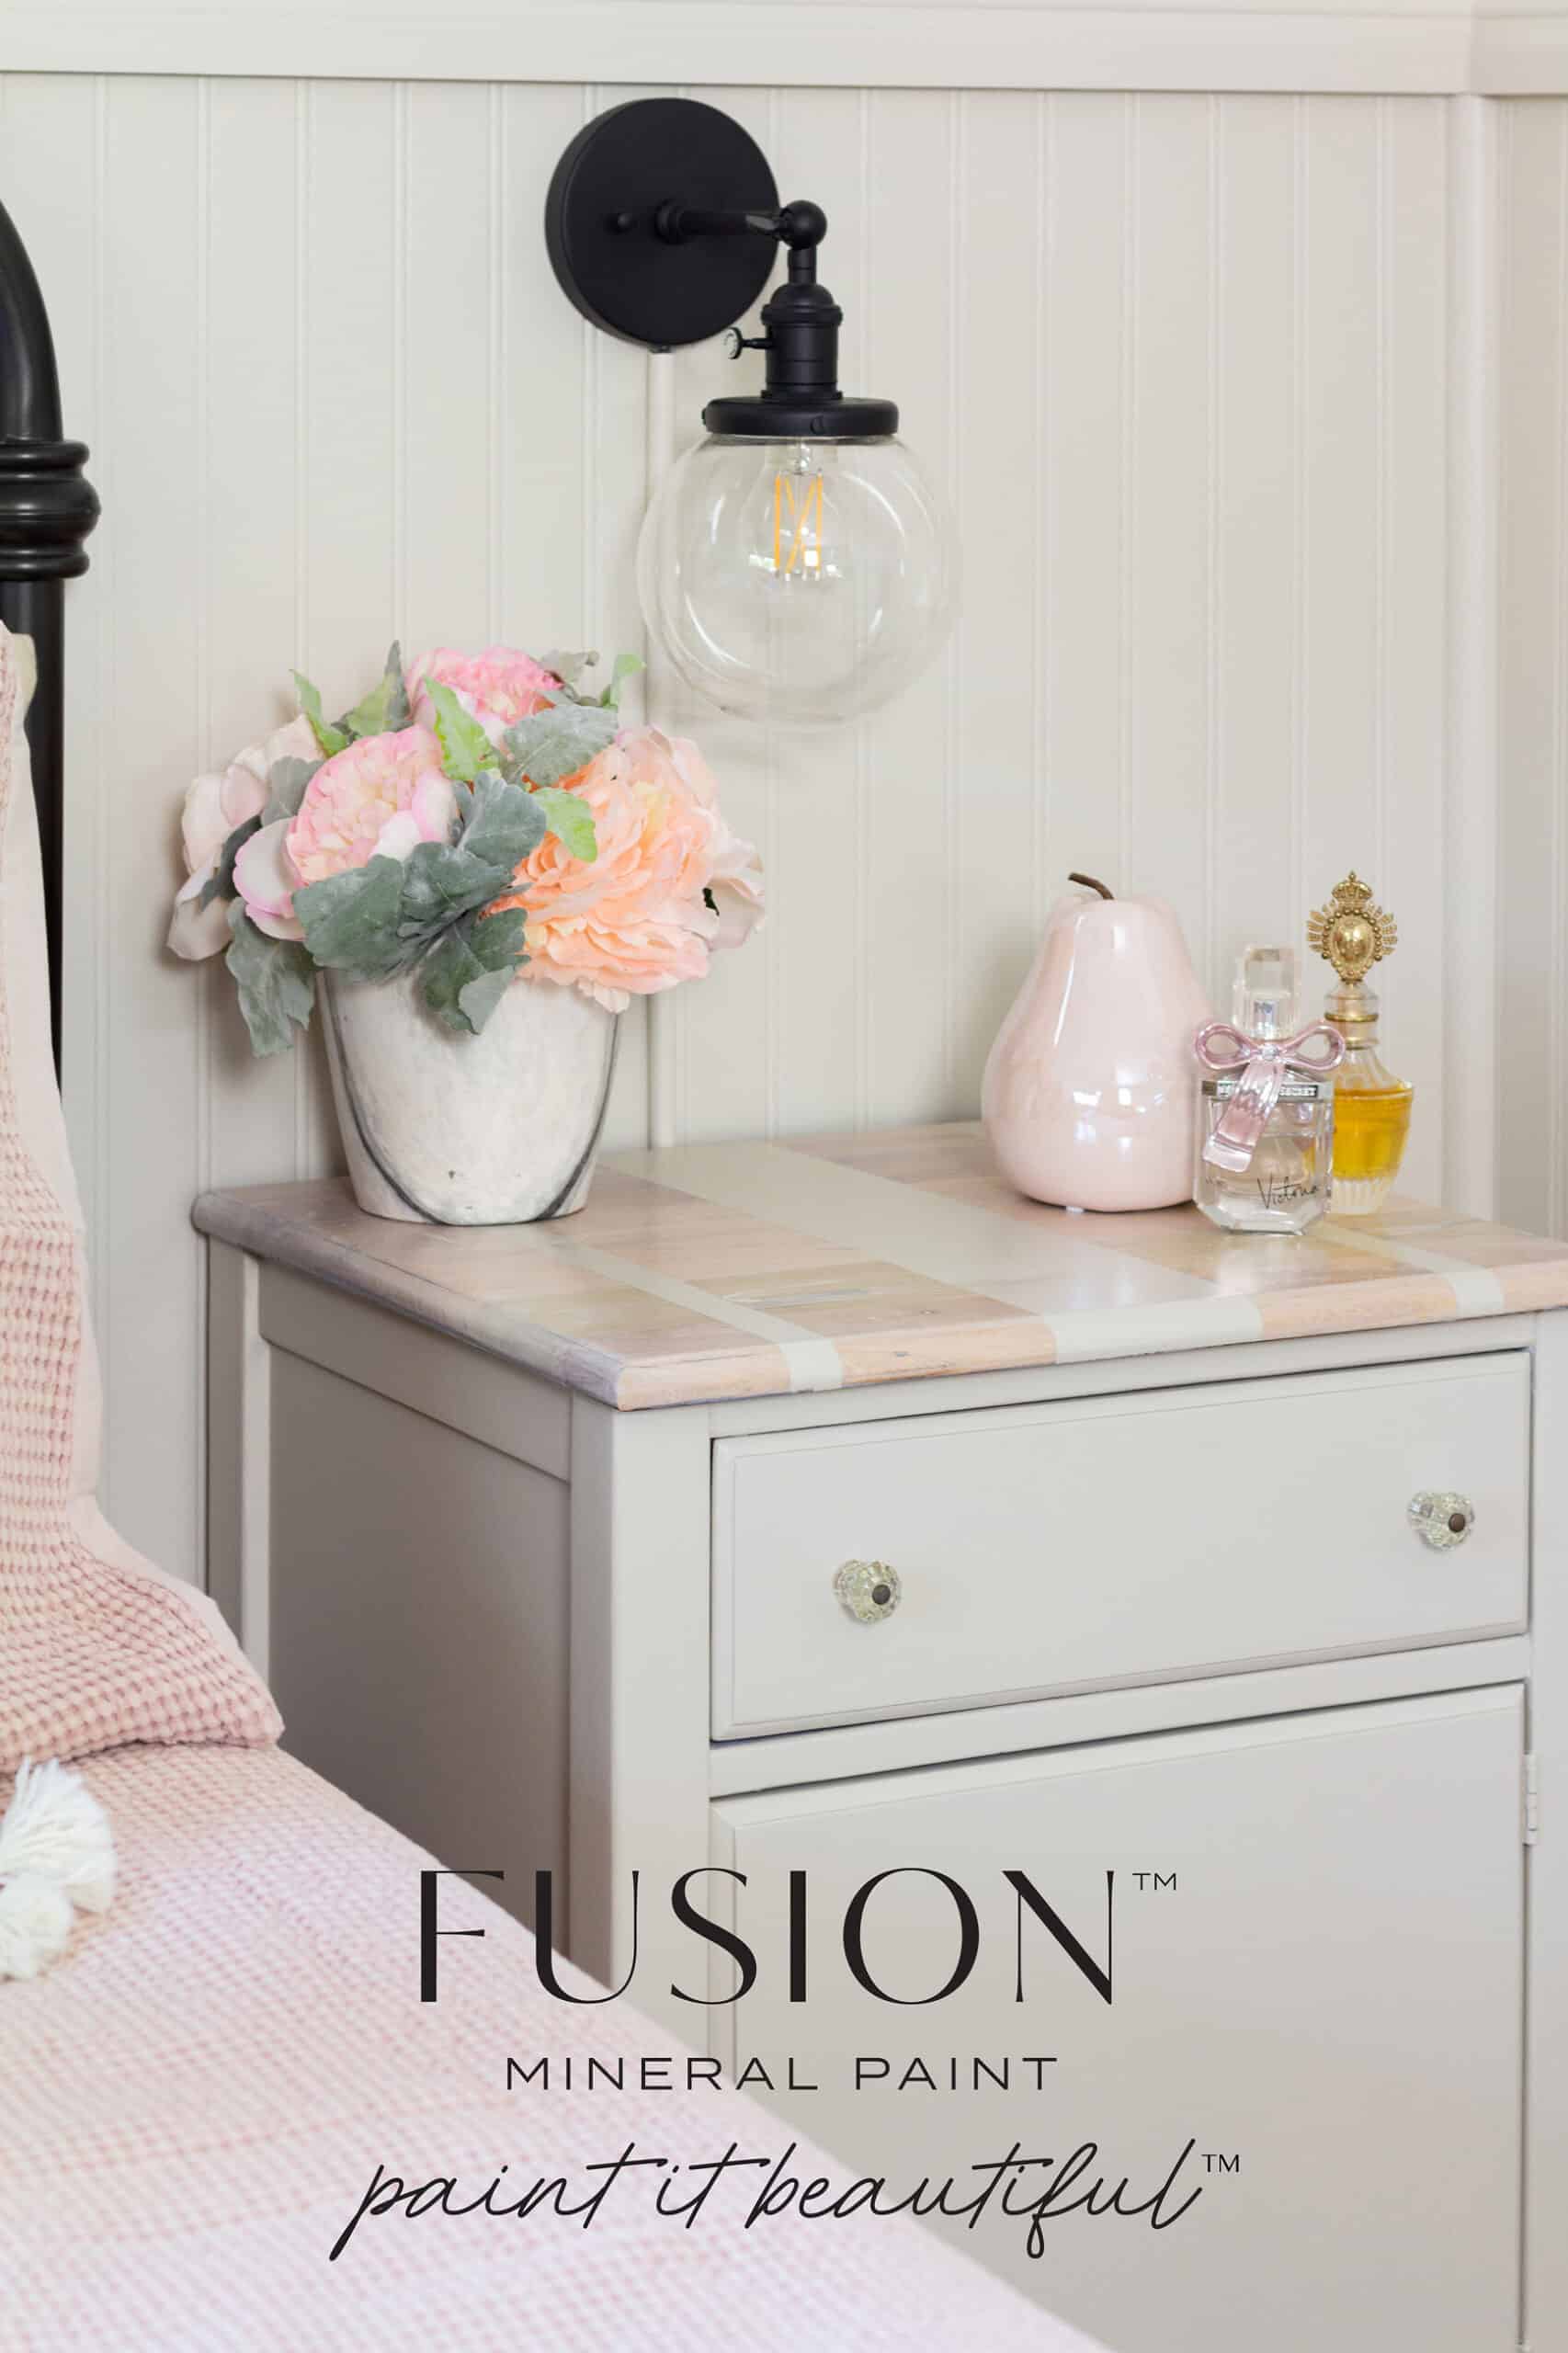 Chateau Fusion Mineral Paint Buy Online